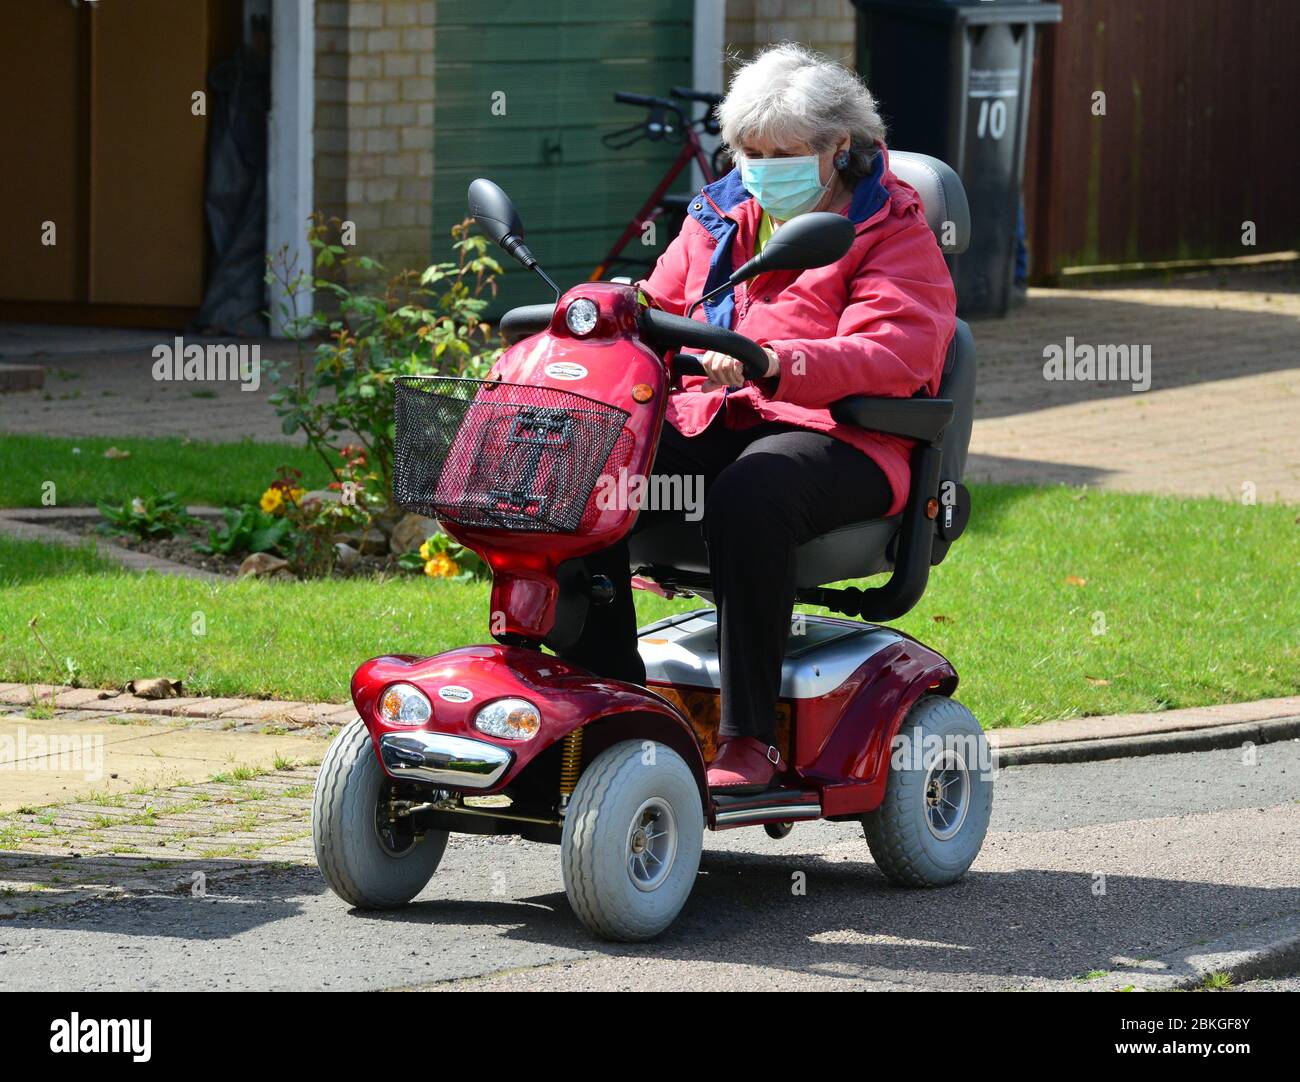 A Lady on a mobility scooter wearing PPE during the Covid-19 Lockdown Stock Photo